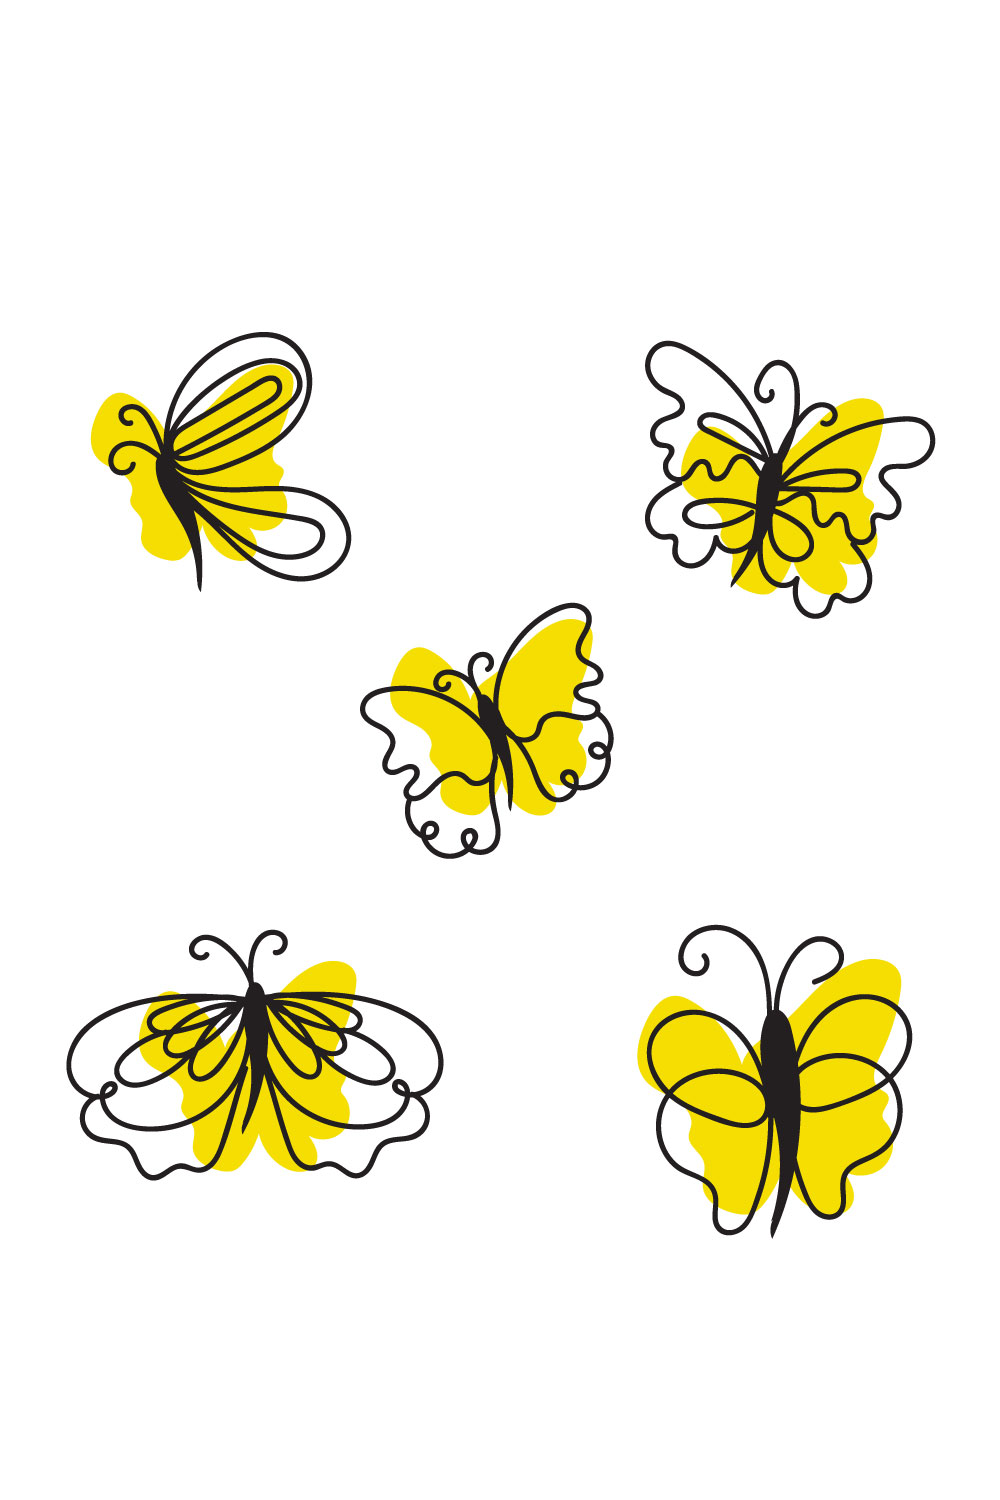 Group of yellow butterflies flying through the air.